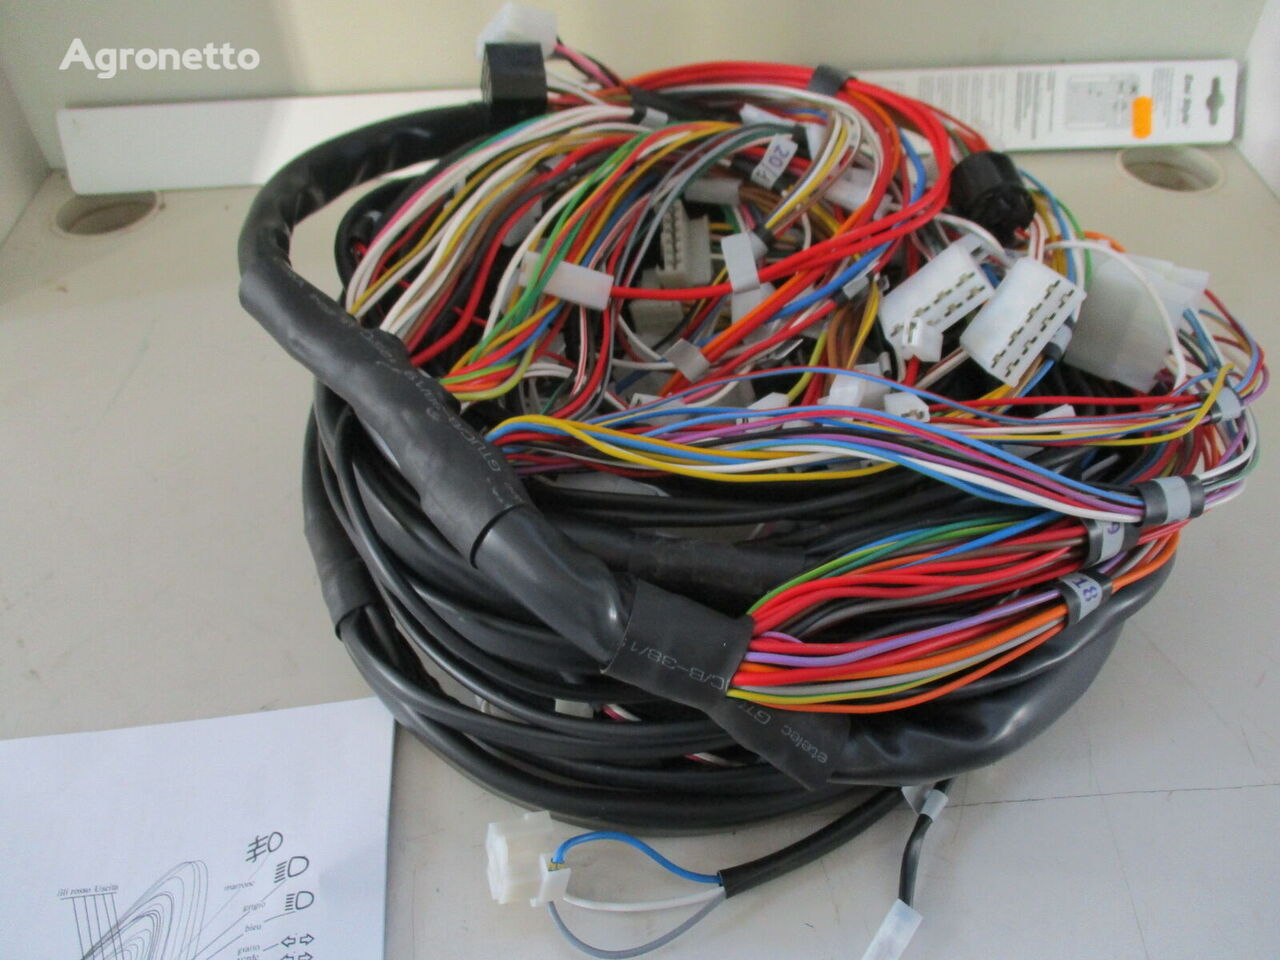 FIAT 1300 wiring for FIAT 1300 wheel tractor